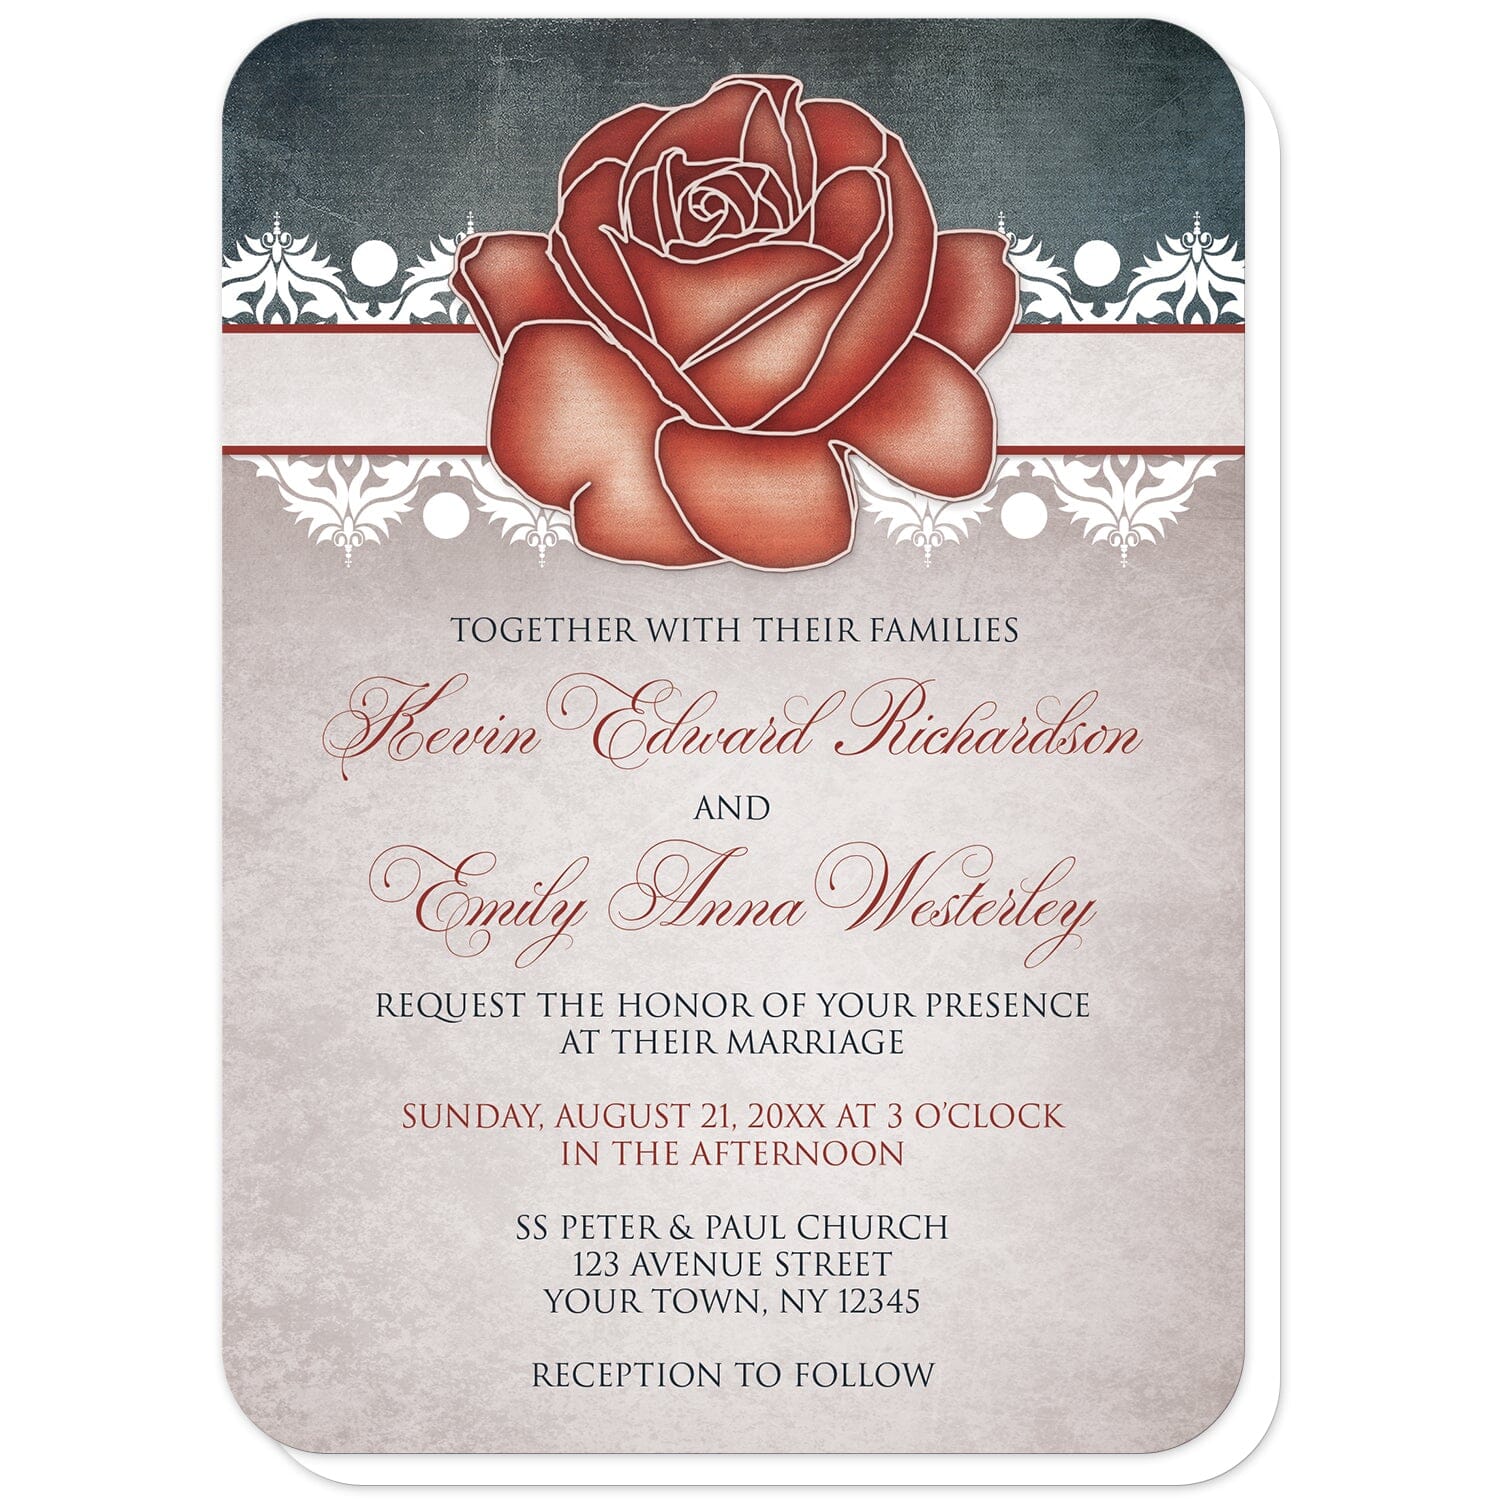 Rustic Country Rose Blue Wedding Invitations (with rounded corners) at Artistically Invited. Rustic country rose blue wedding invitations designed with an eclectic mix of rustic, vintage, and modern elements. They feature an artistic red rose at the top over a stripe lined with white damask elements with a dark navy blue design at the top. Your personalized marriage celebration details are custom printed in red and navy blue over a beige vintage parchment illustration below the rose.